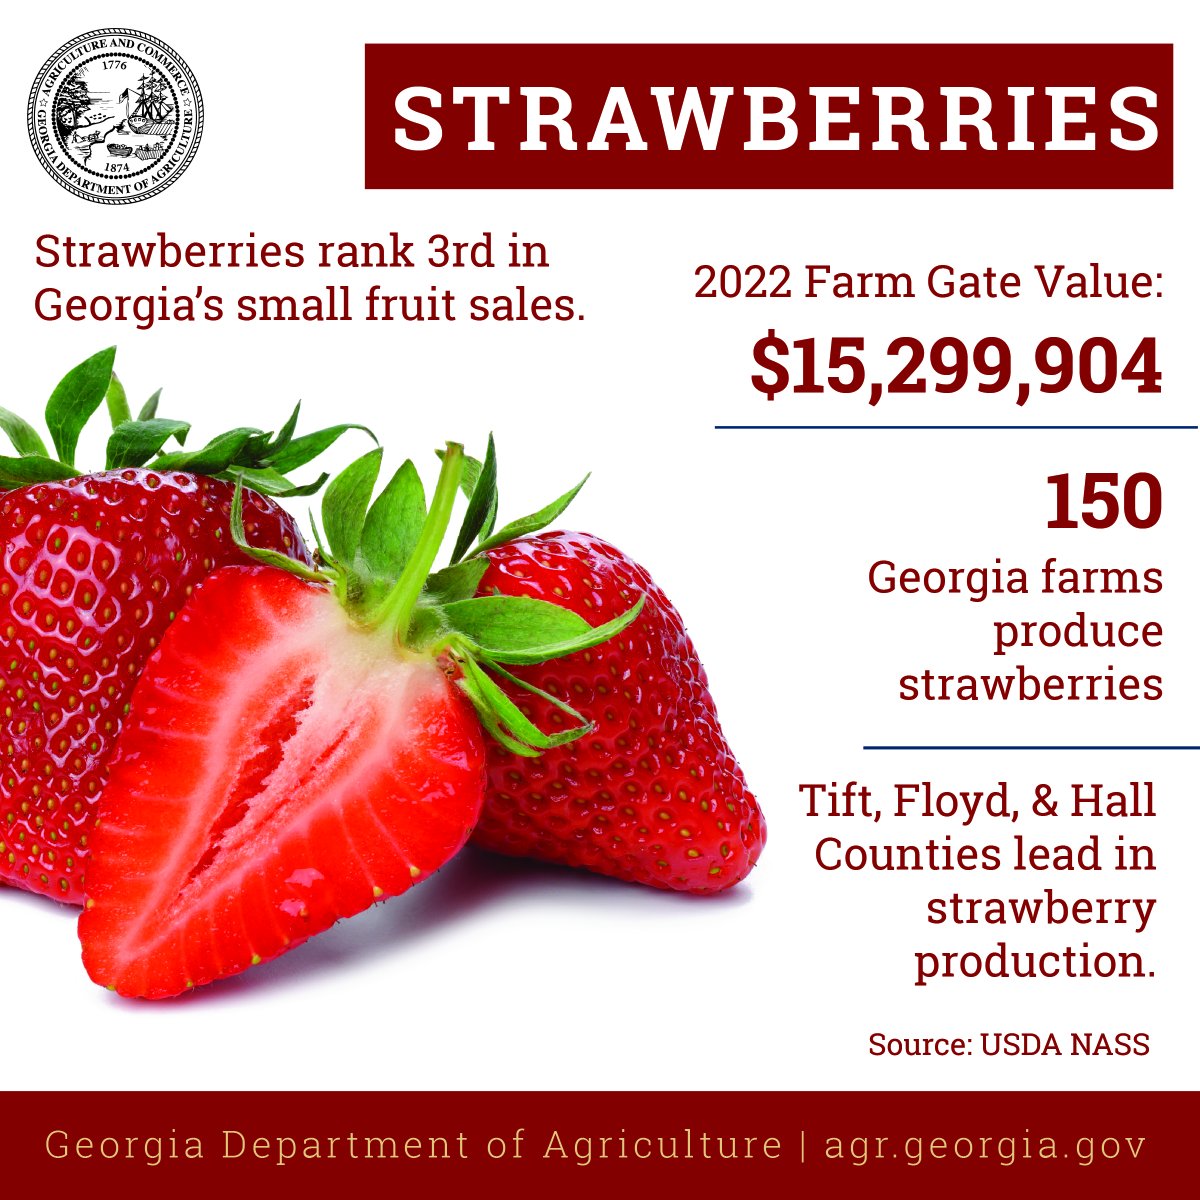 🍓 May is National Strawberry Month! Did you know that in Georgia, fruits and vegetables rank as the #2 cash crop? The love for small fruits like strawberries goes beyond commercial farms—they're a cherished commodity statewide! #Georgia #Agriculture #Agribusiness #Strawberries